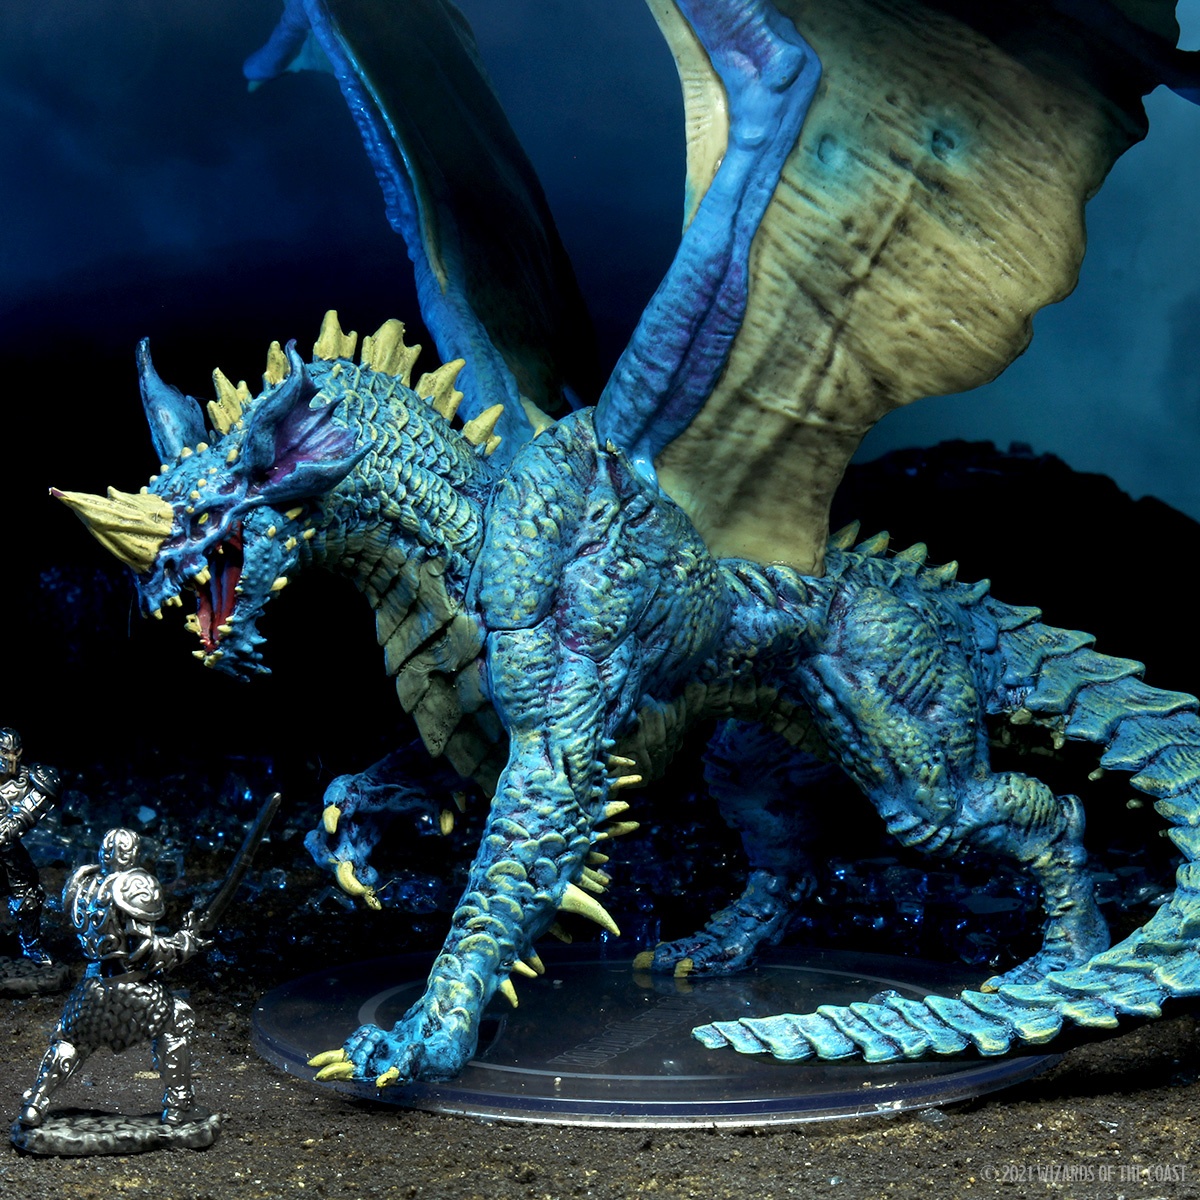 Dungeons & Dragons Miniatures: Icons of the Realms - Adult Blue Dragon  Premium Figurine - Game Nerdz